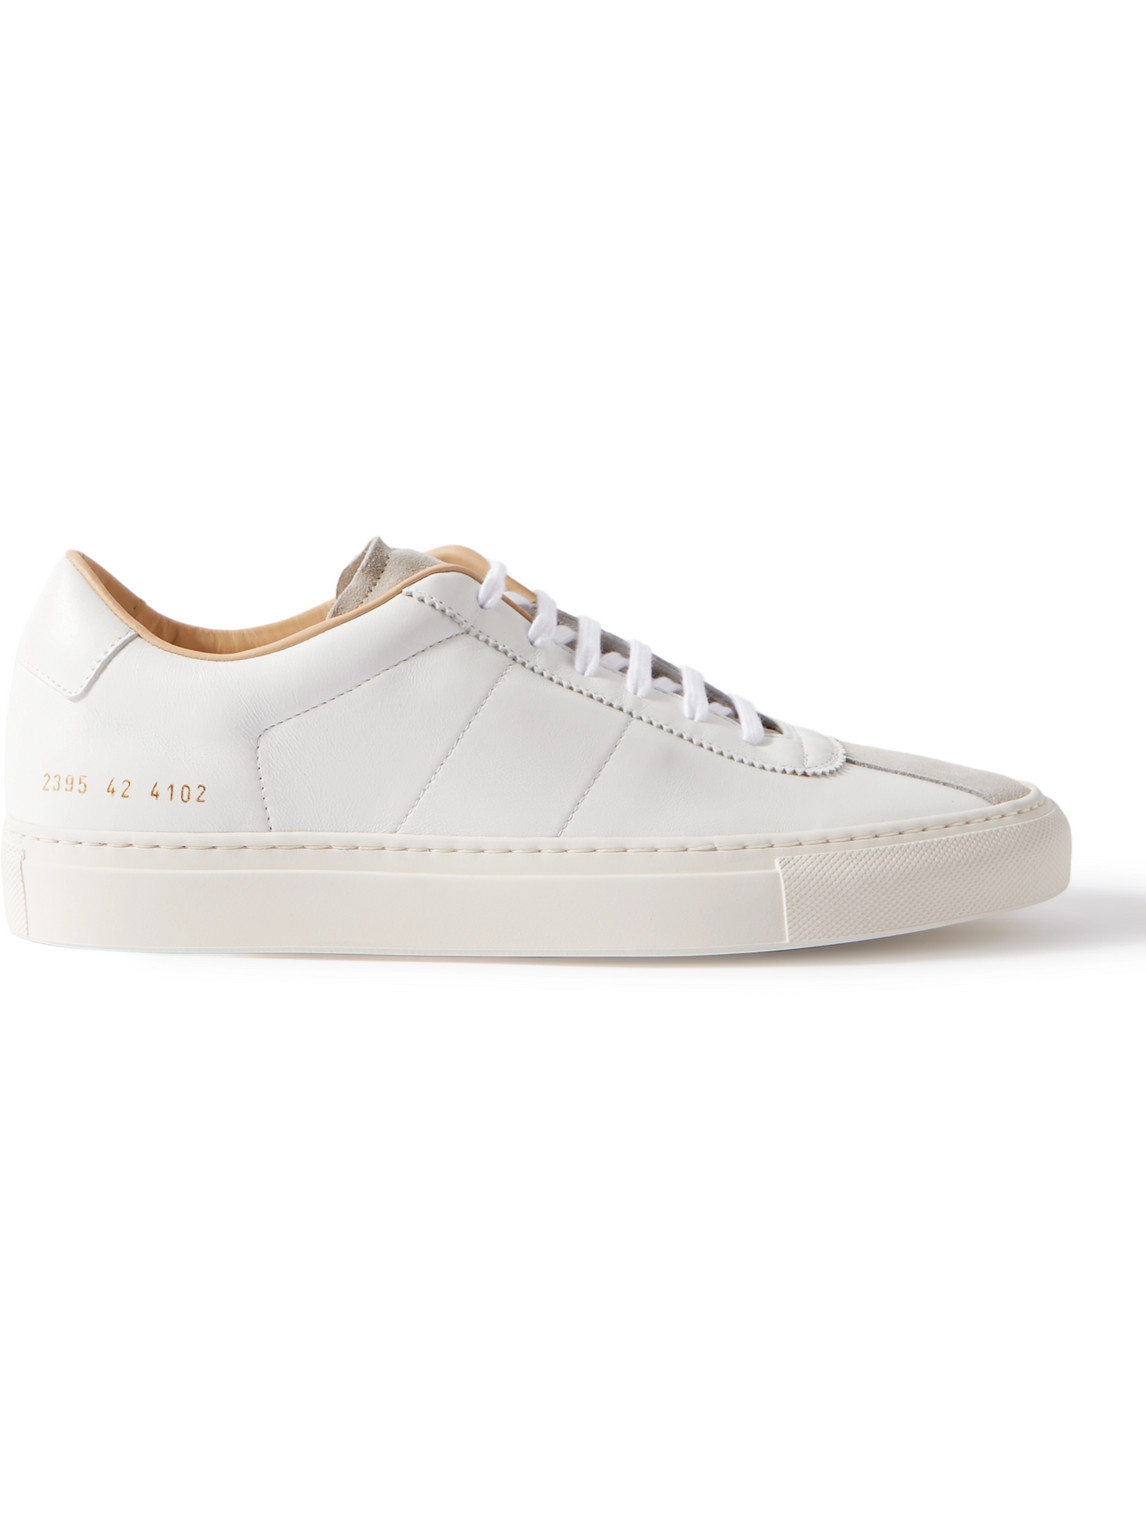 COMMON PROJECTS COURT CLASSIC SUEDE-TRIMMED LEATHER SNEAKERS